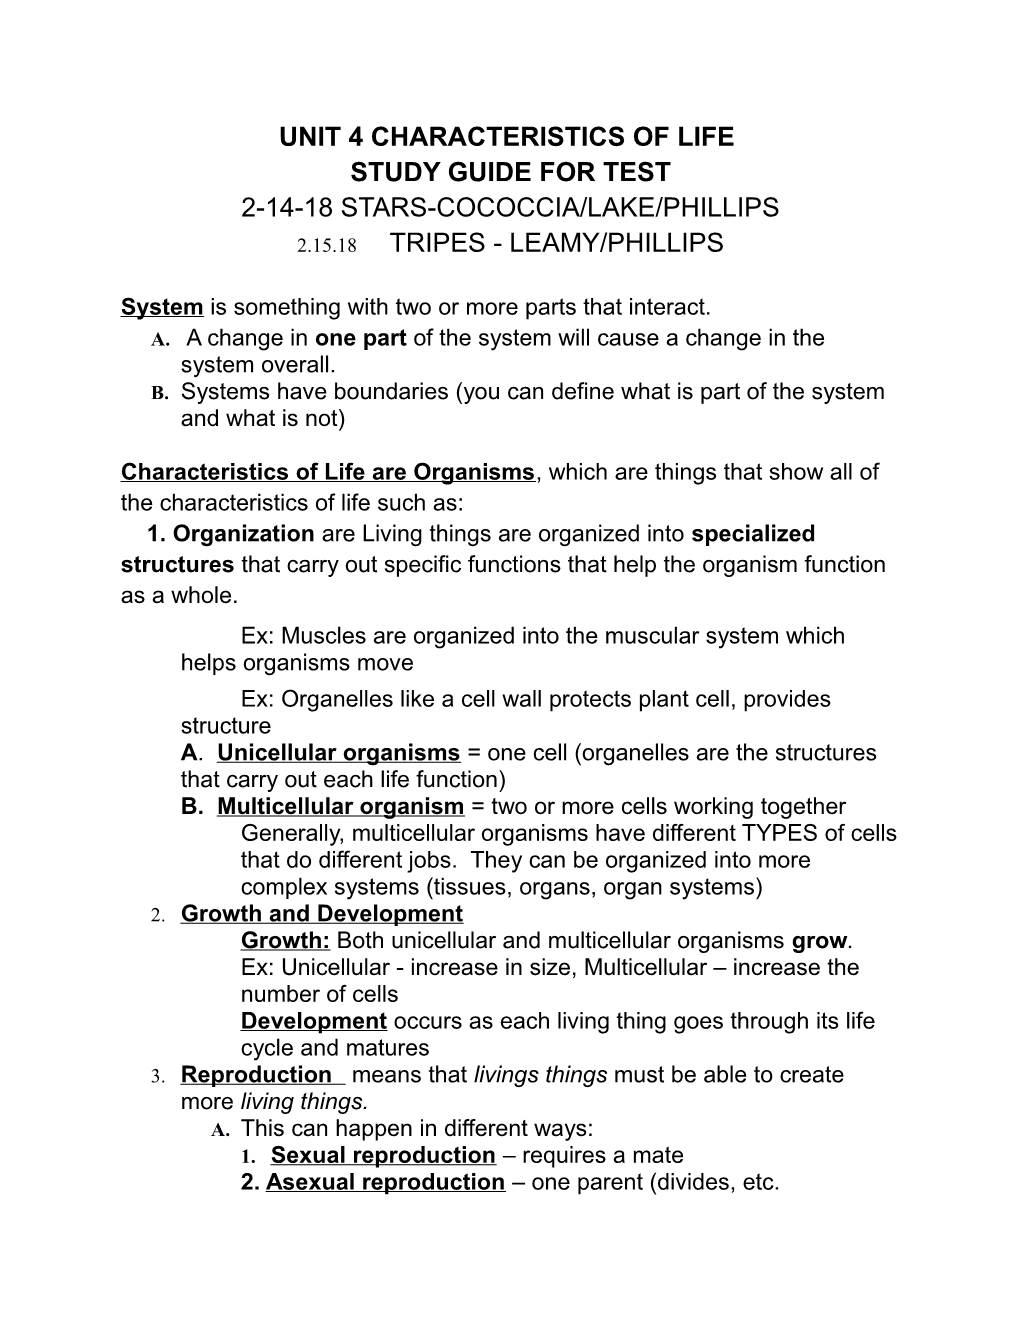 Study Guide for Test